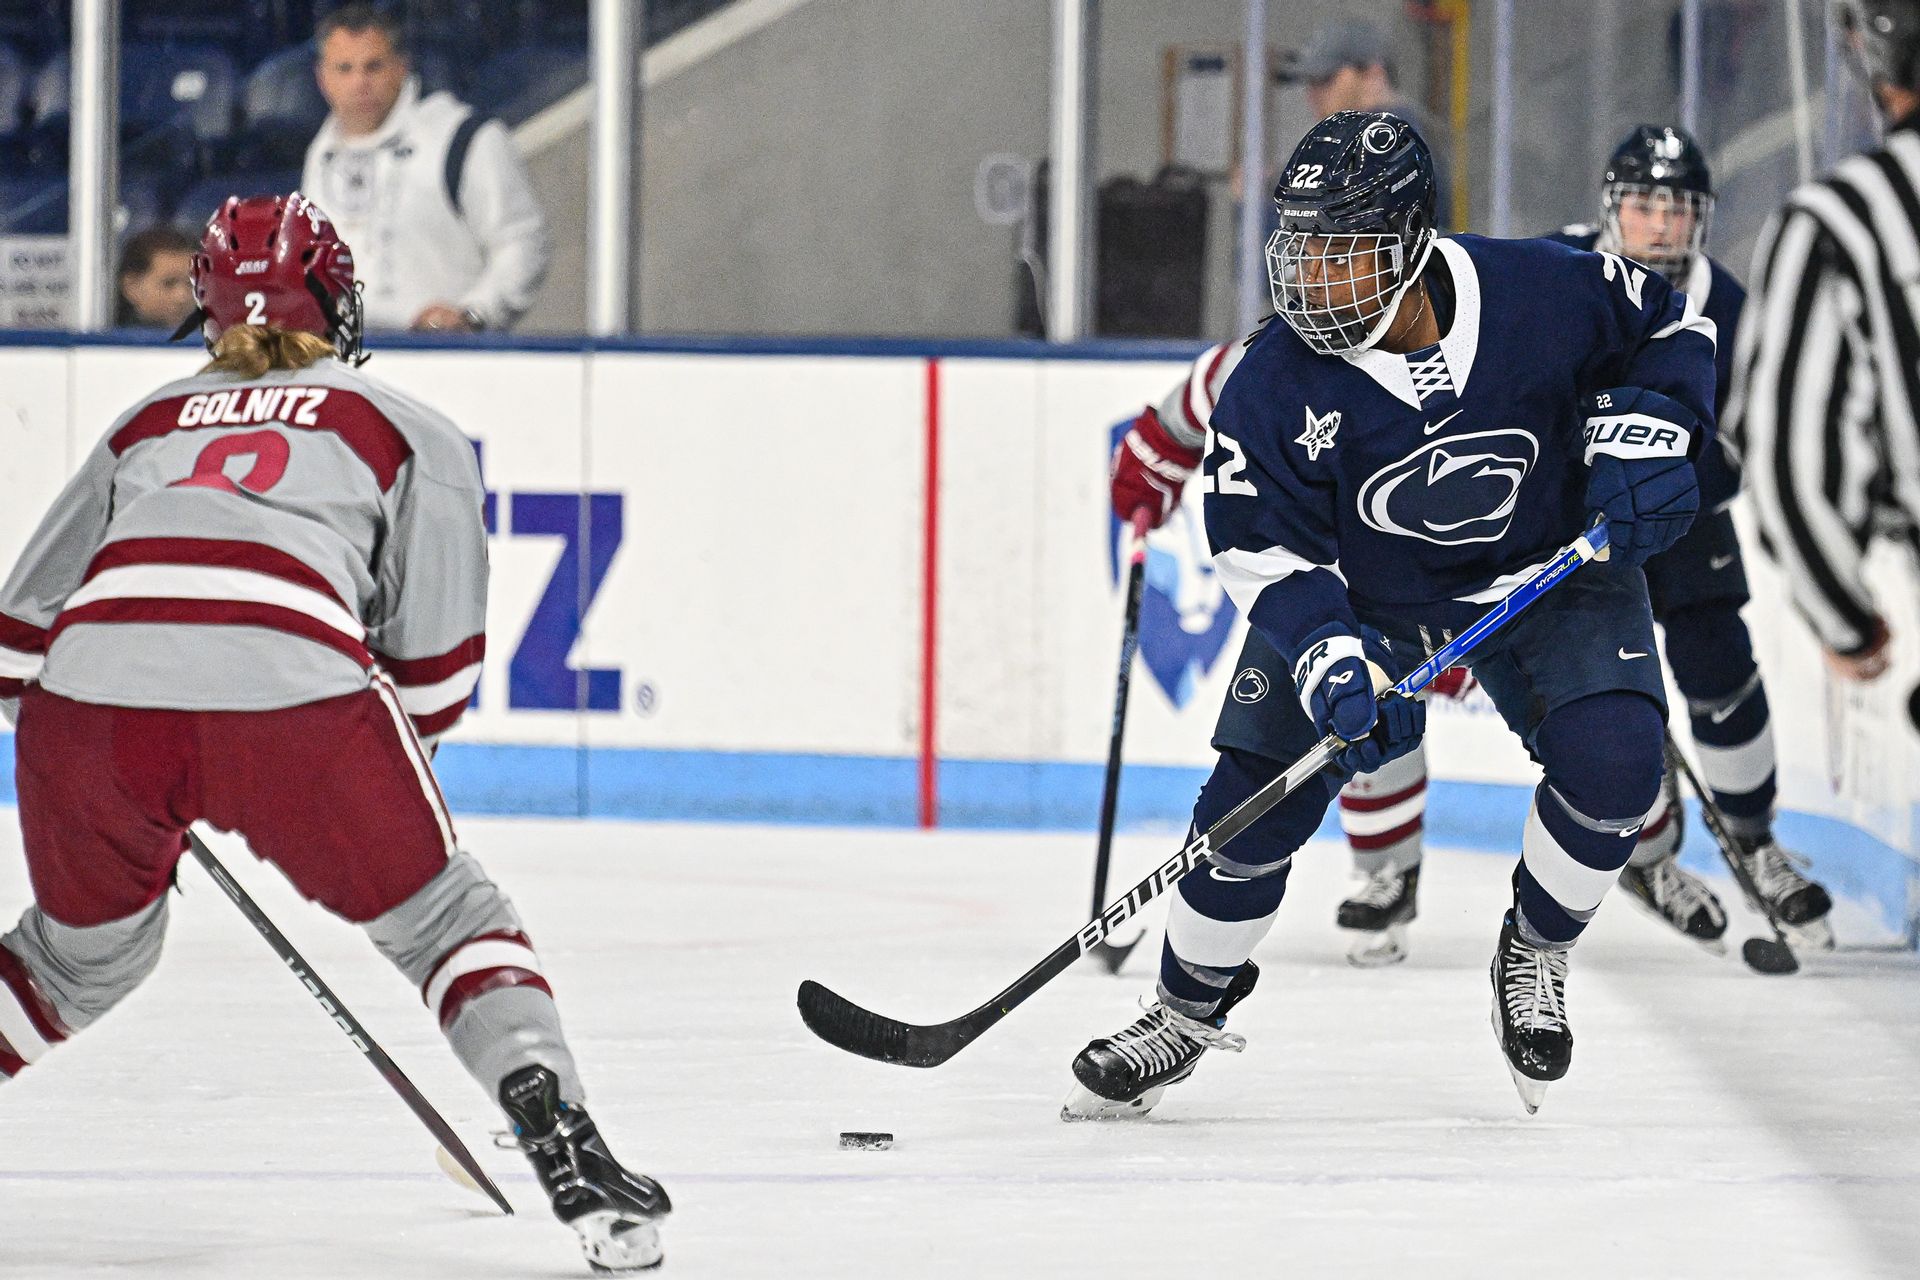 11th Ranked Penn State Nipped By #6 Colgate In Women's Hockey